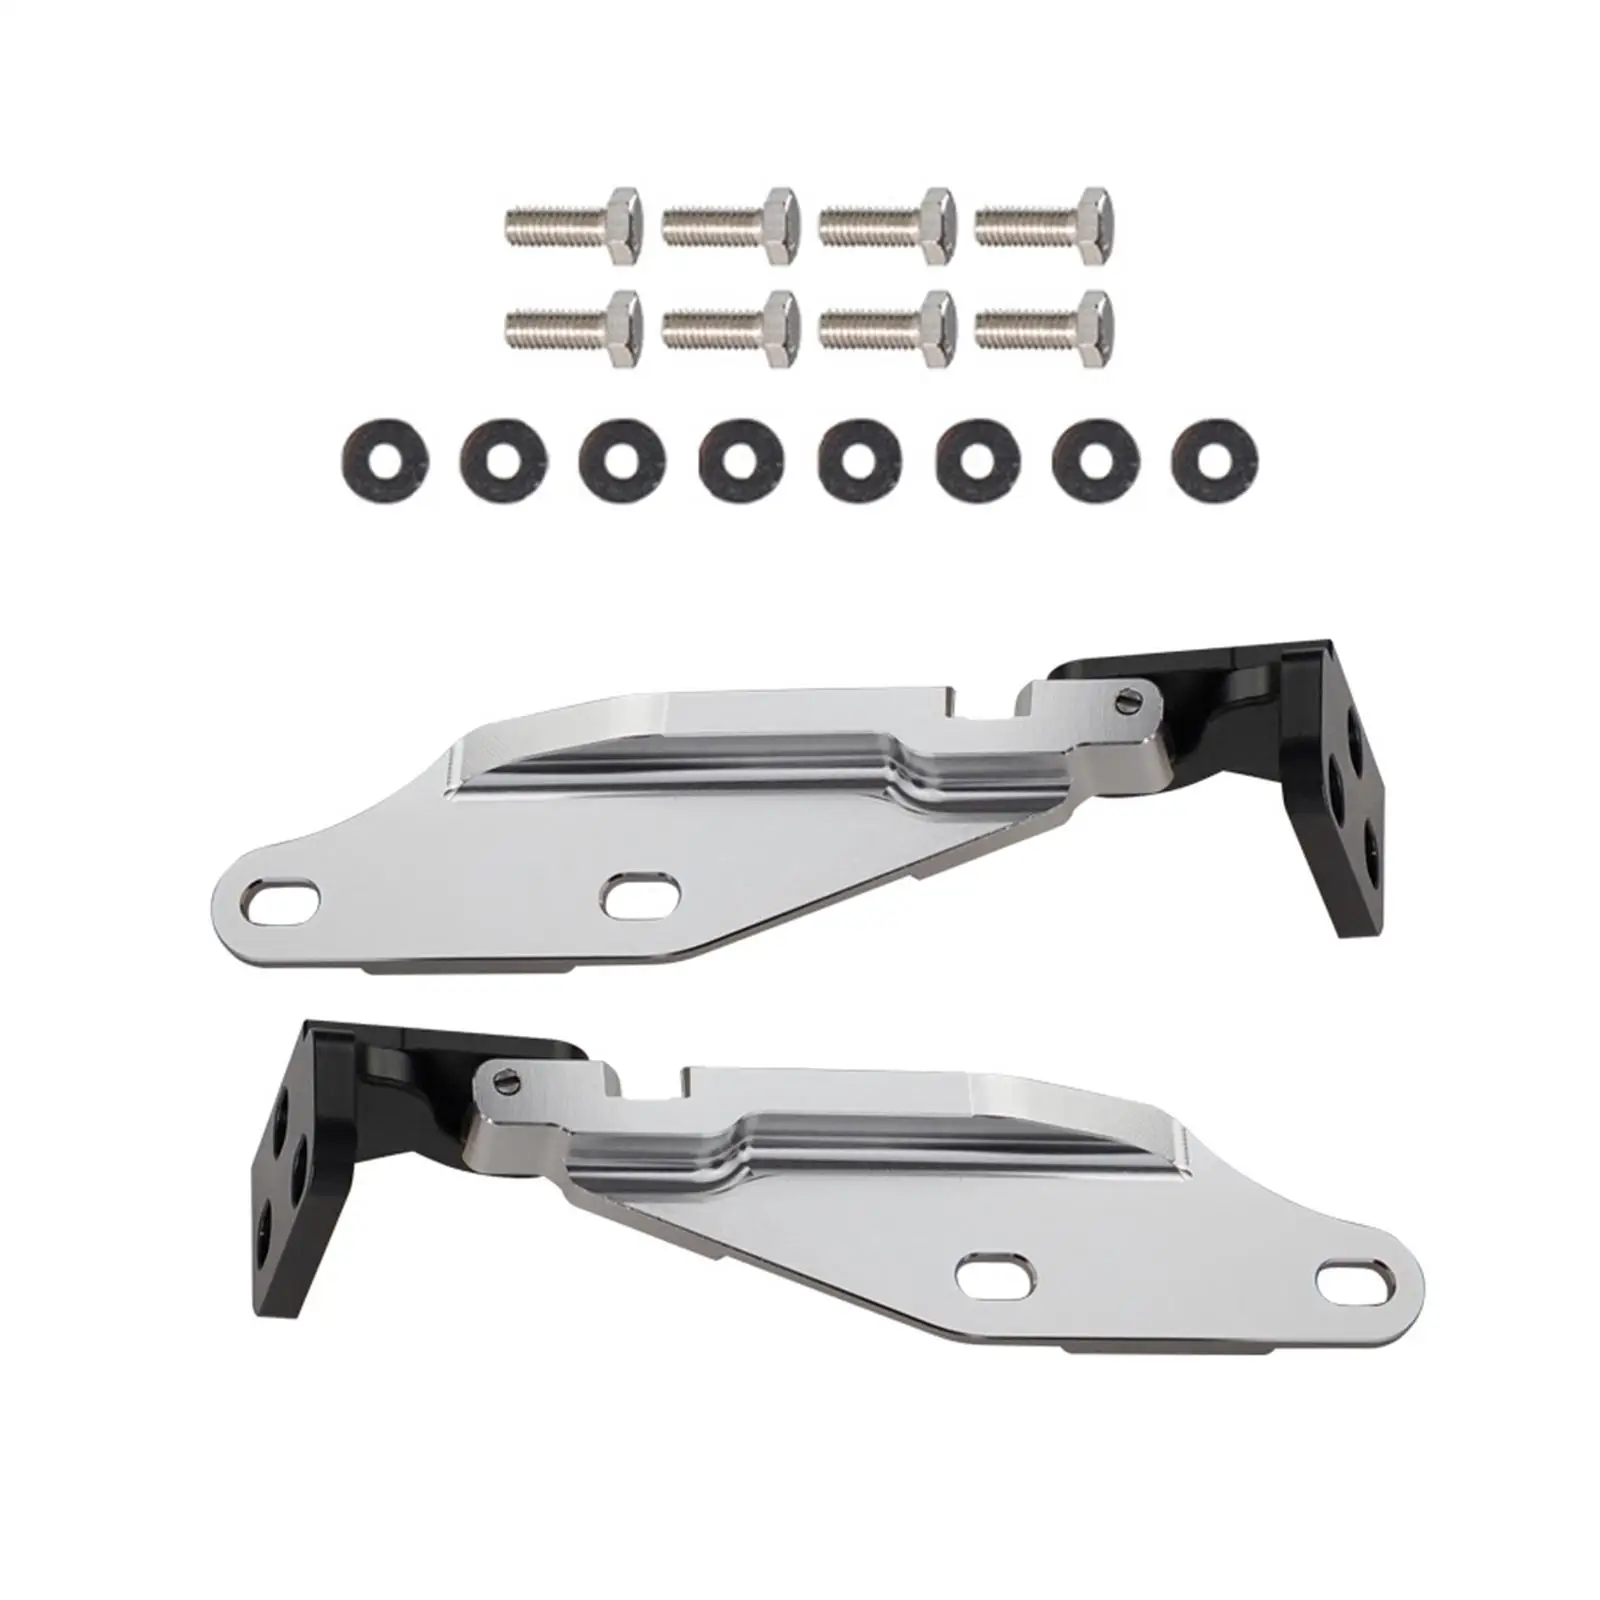 2x Quick Release Hood Hinge with Screws Gaskets Automotive Spare Parts for Honda CRV RD Civic Type R DC2 EK Acura Replaces